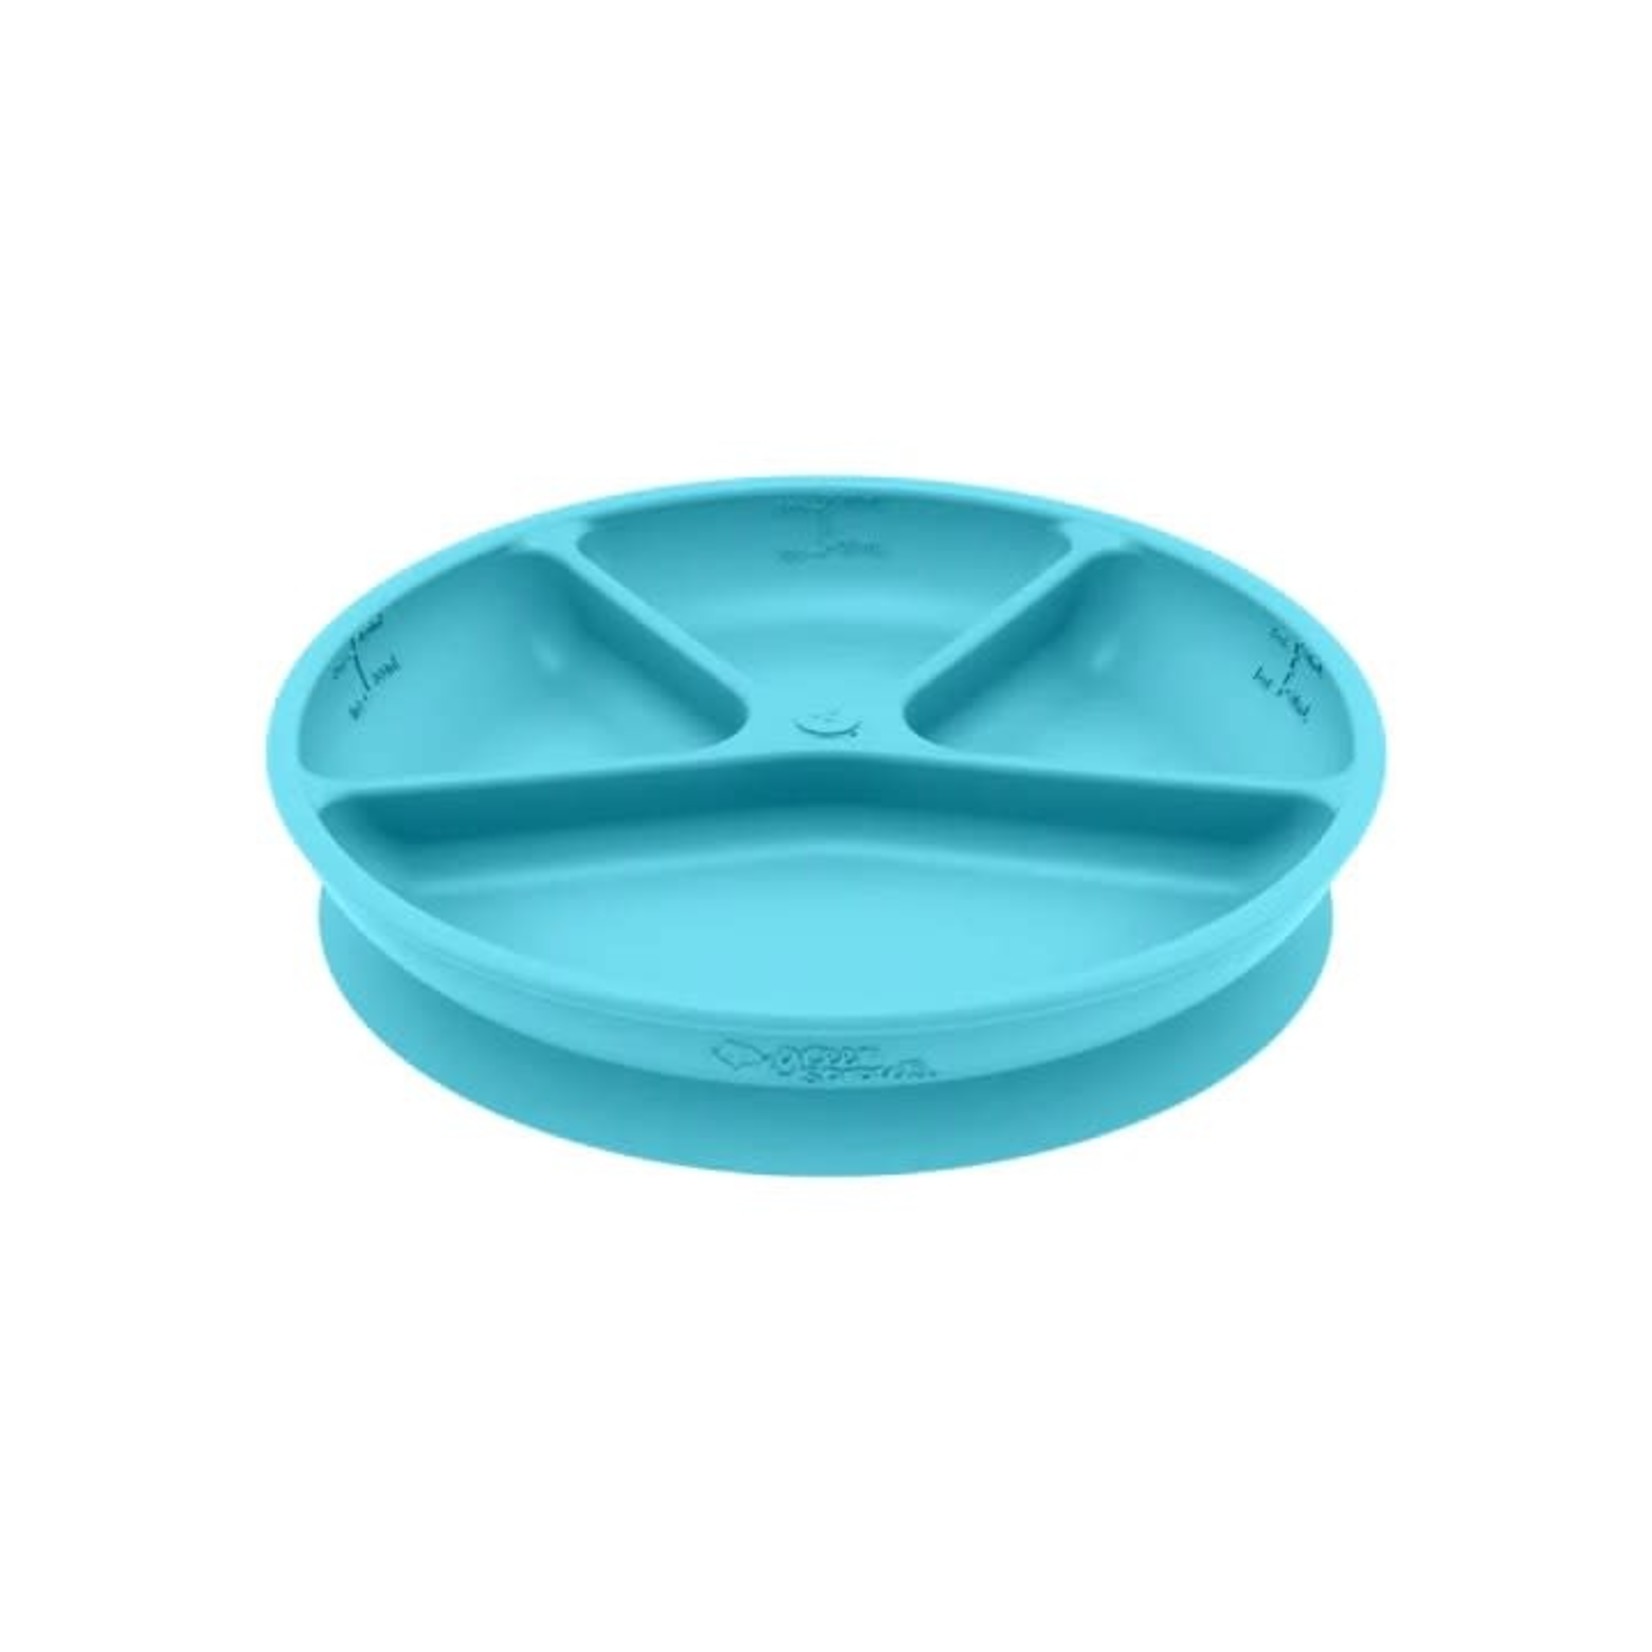 Green Sprouts Learning Plate Aqua